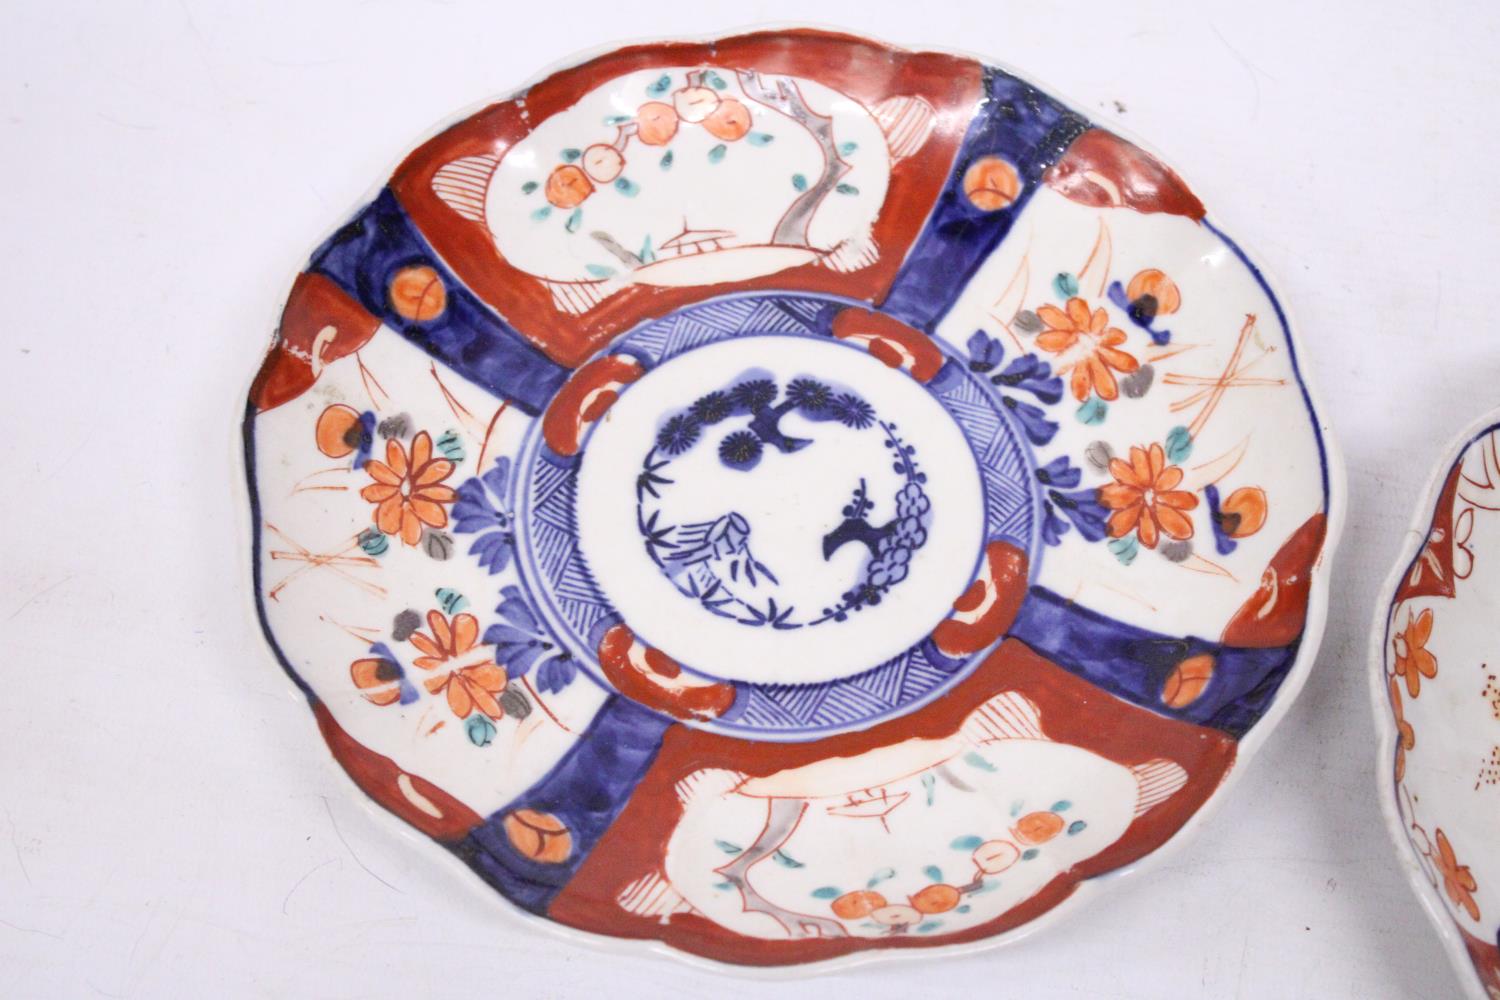 TWO ANTIQUE JAPANESE IMARI HAND PAINTED LOBED EDGED PLATES - 21 AND 22 CM - Image 2 of 6